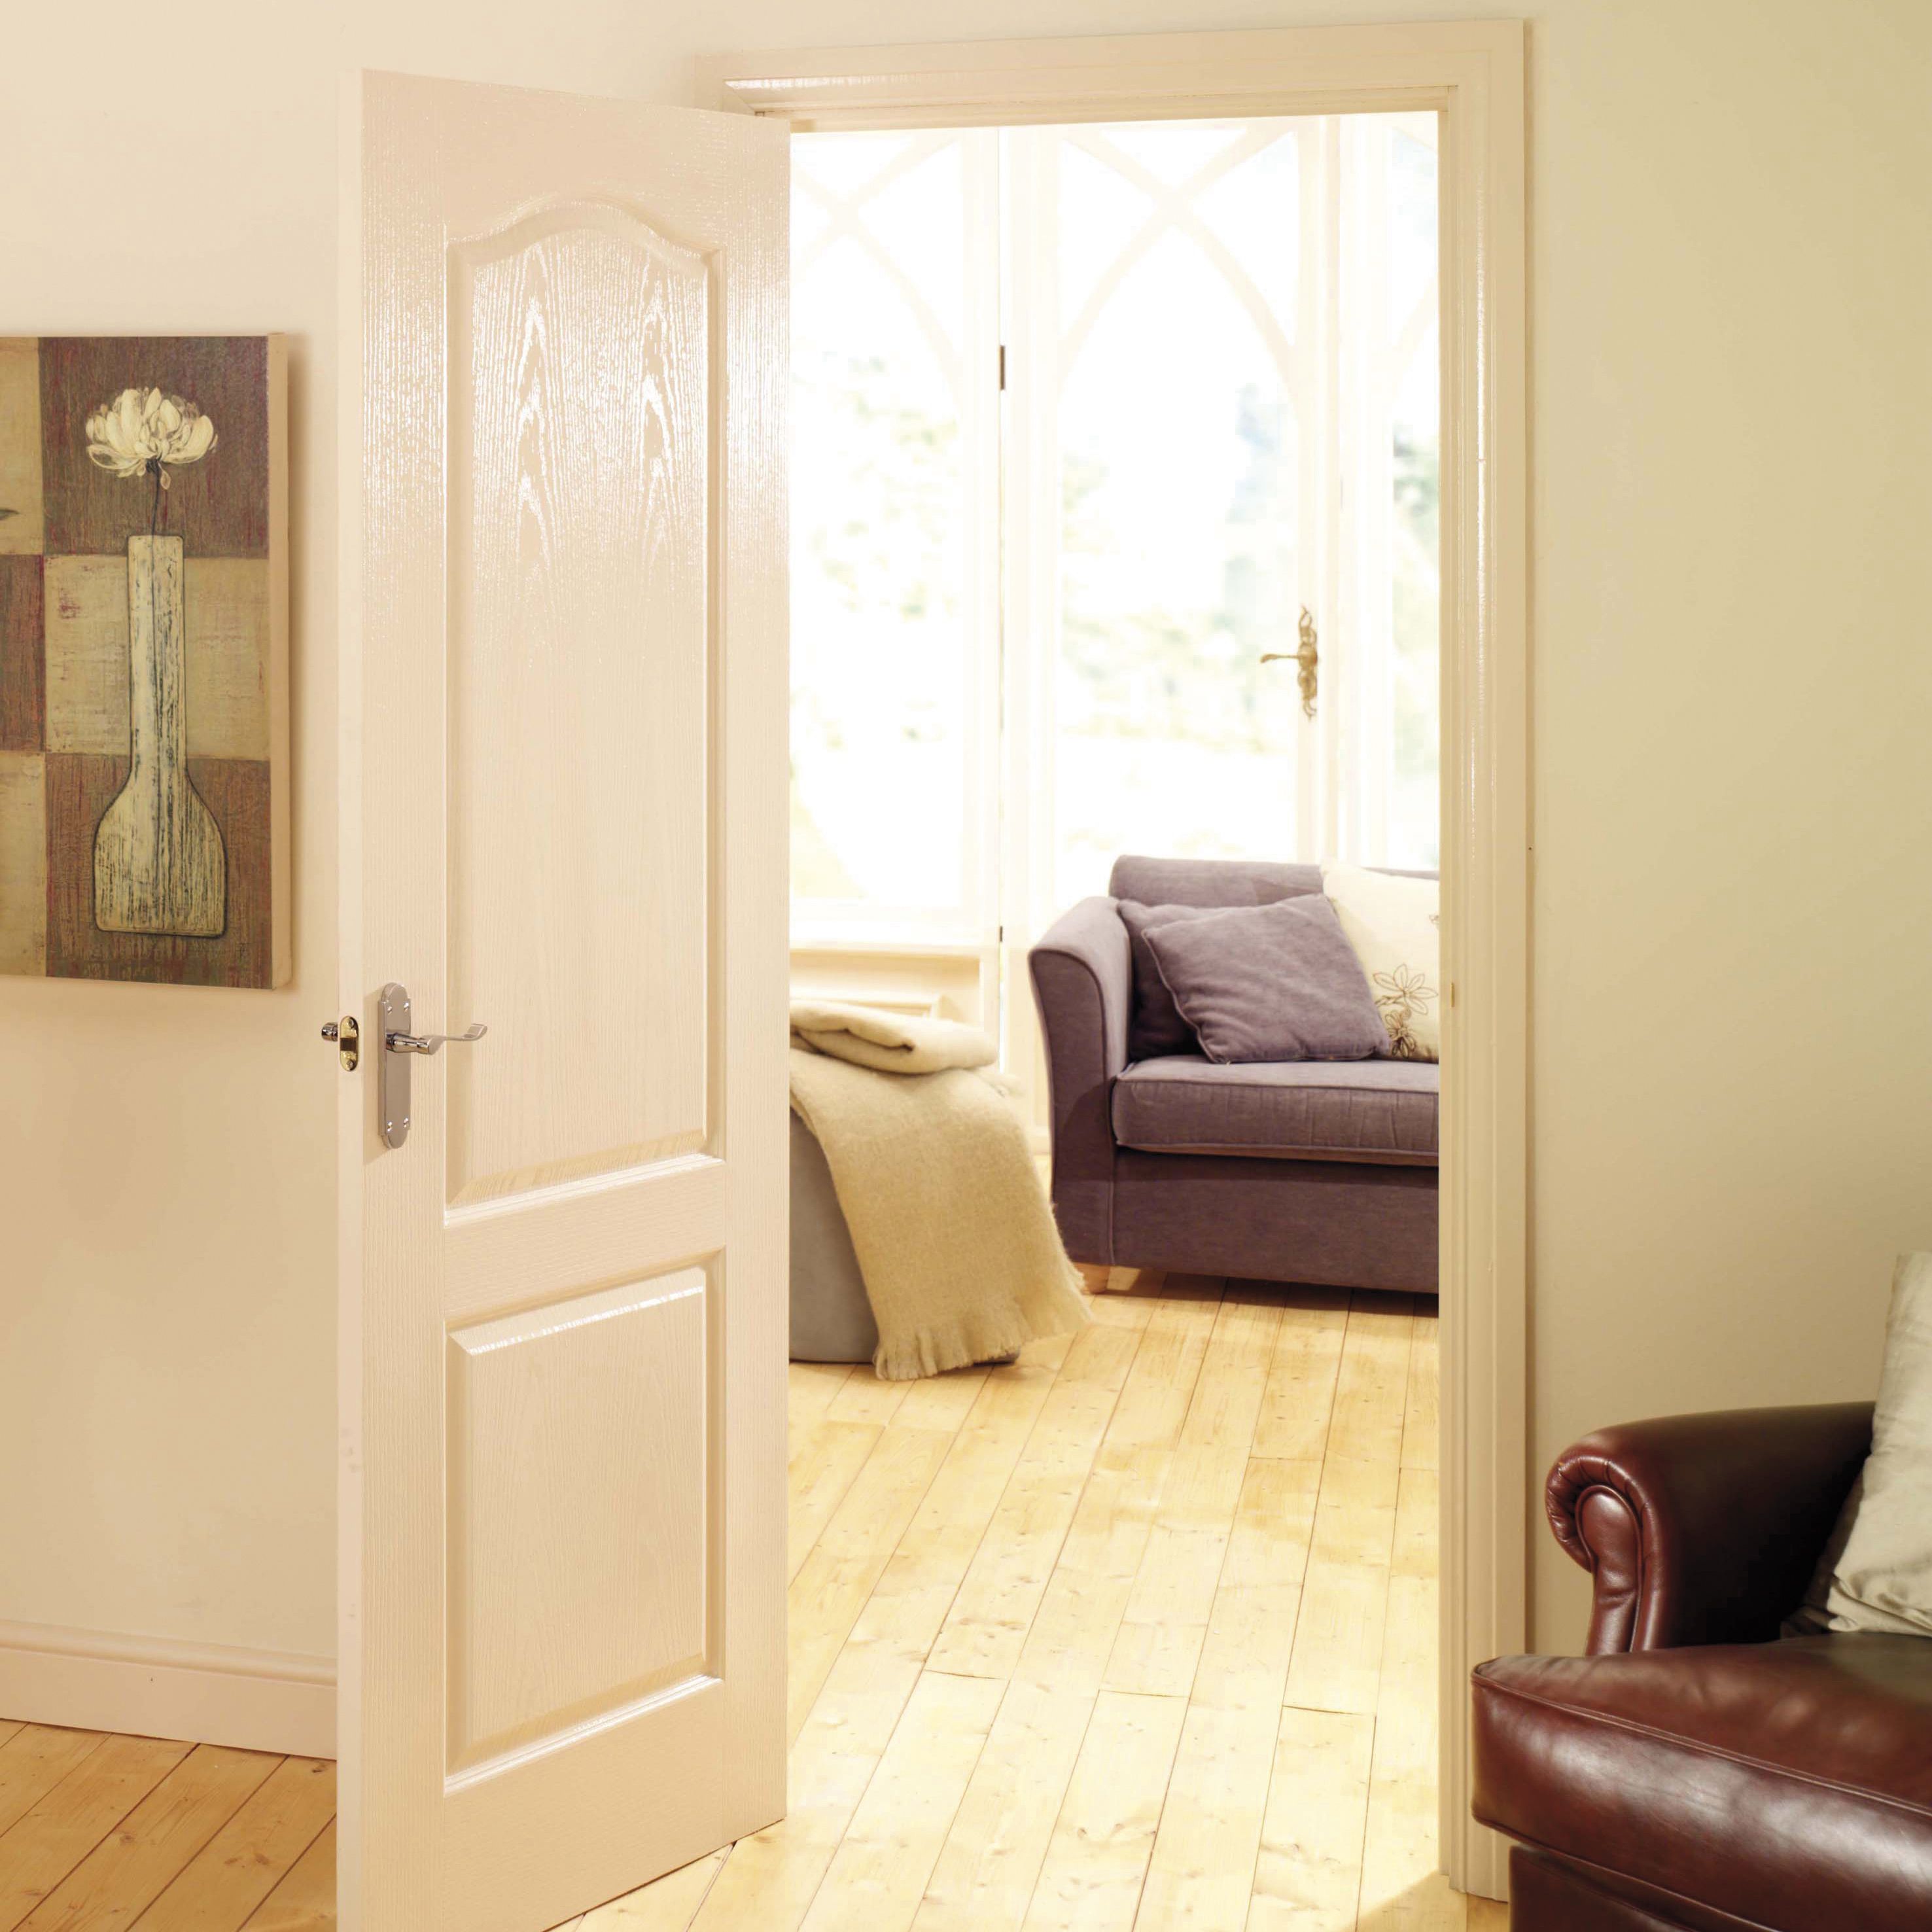 Arched 2 panel Unglazed Arched White Woodgrain effect Internal Door, (H)1981mm (W)838mm (T)35mm